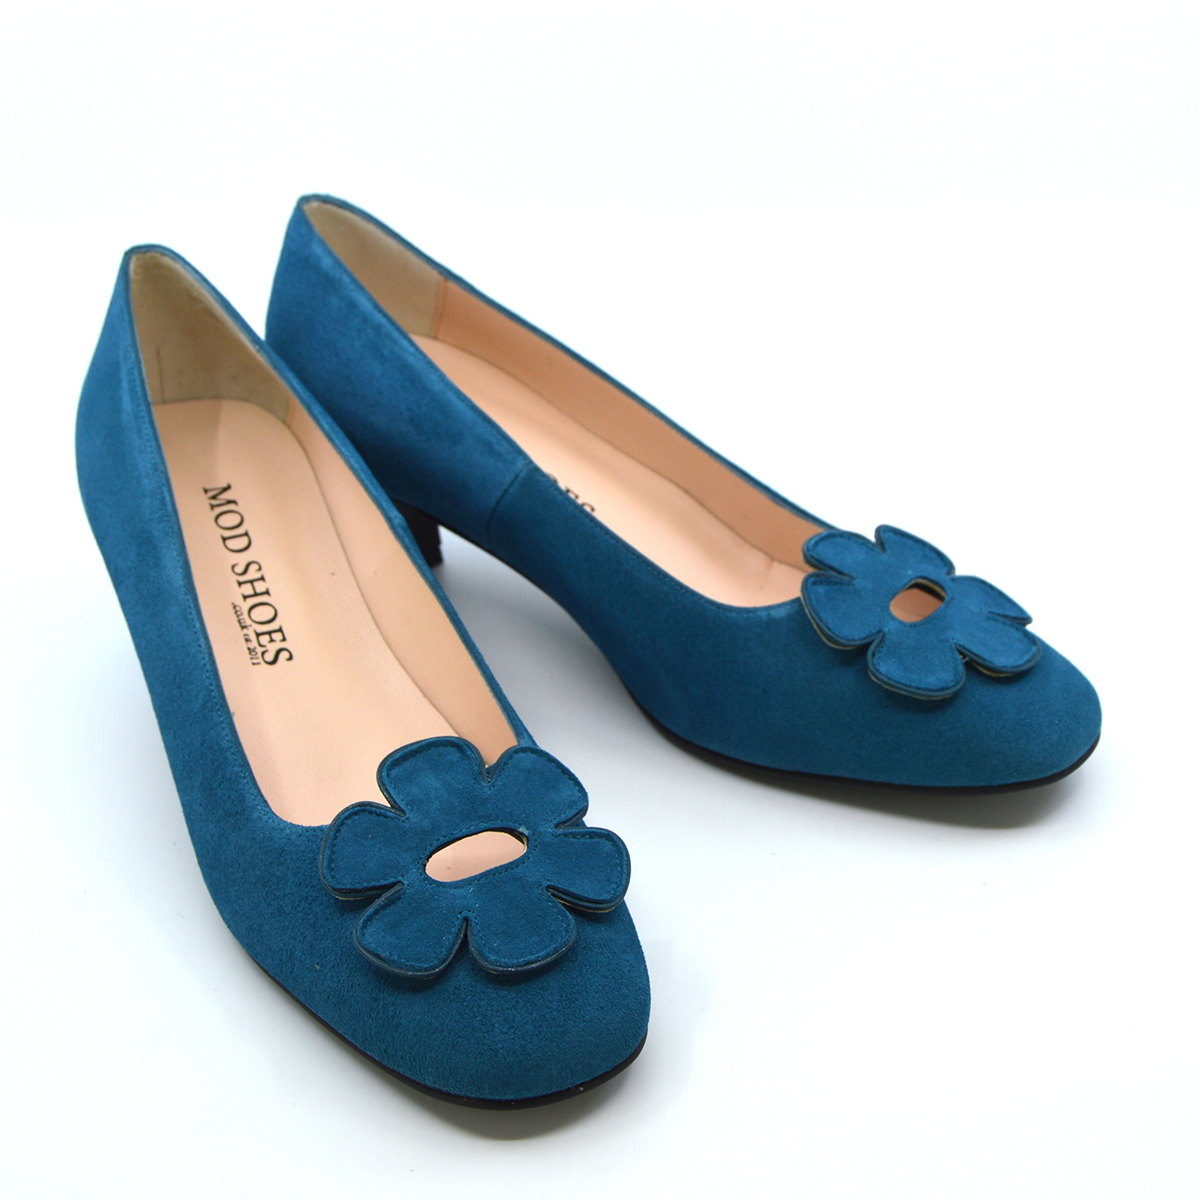 The Fleur Flower Shoes – Teal Suede 